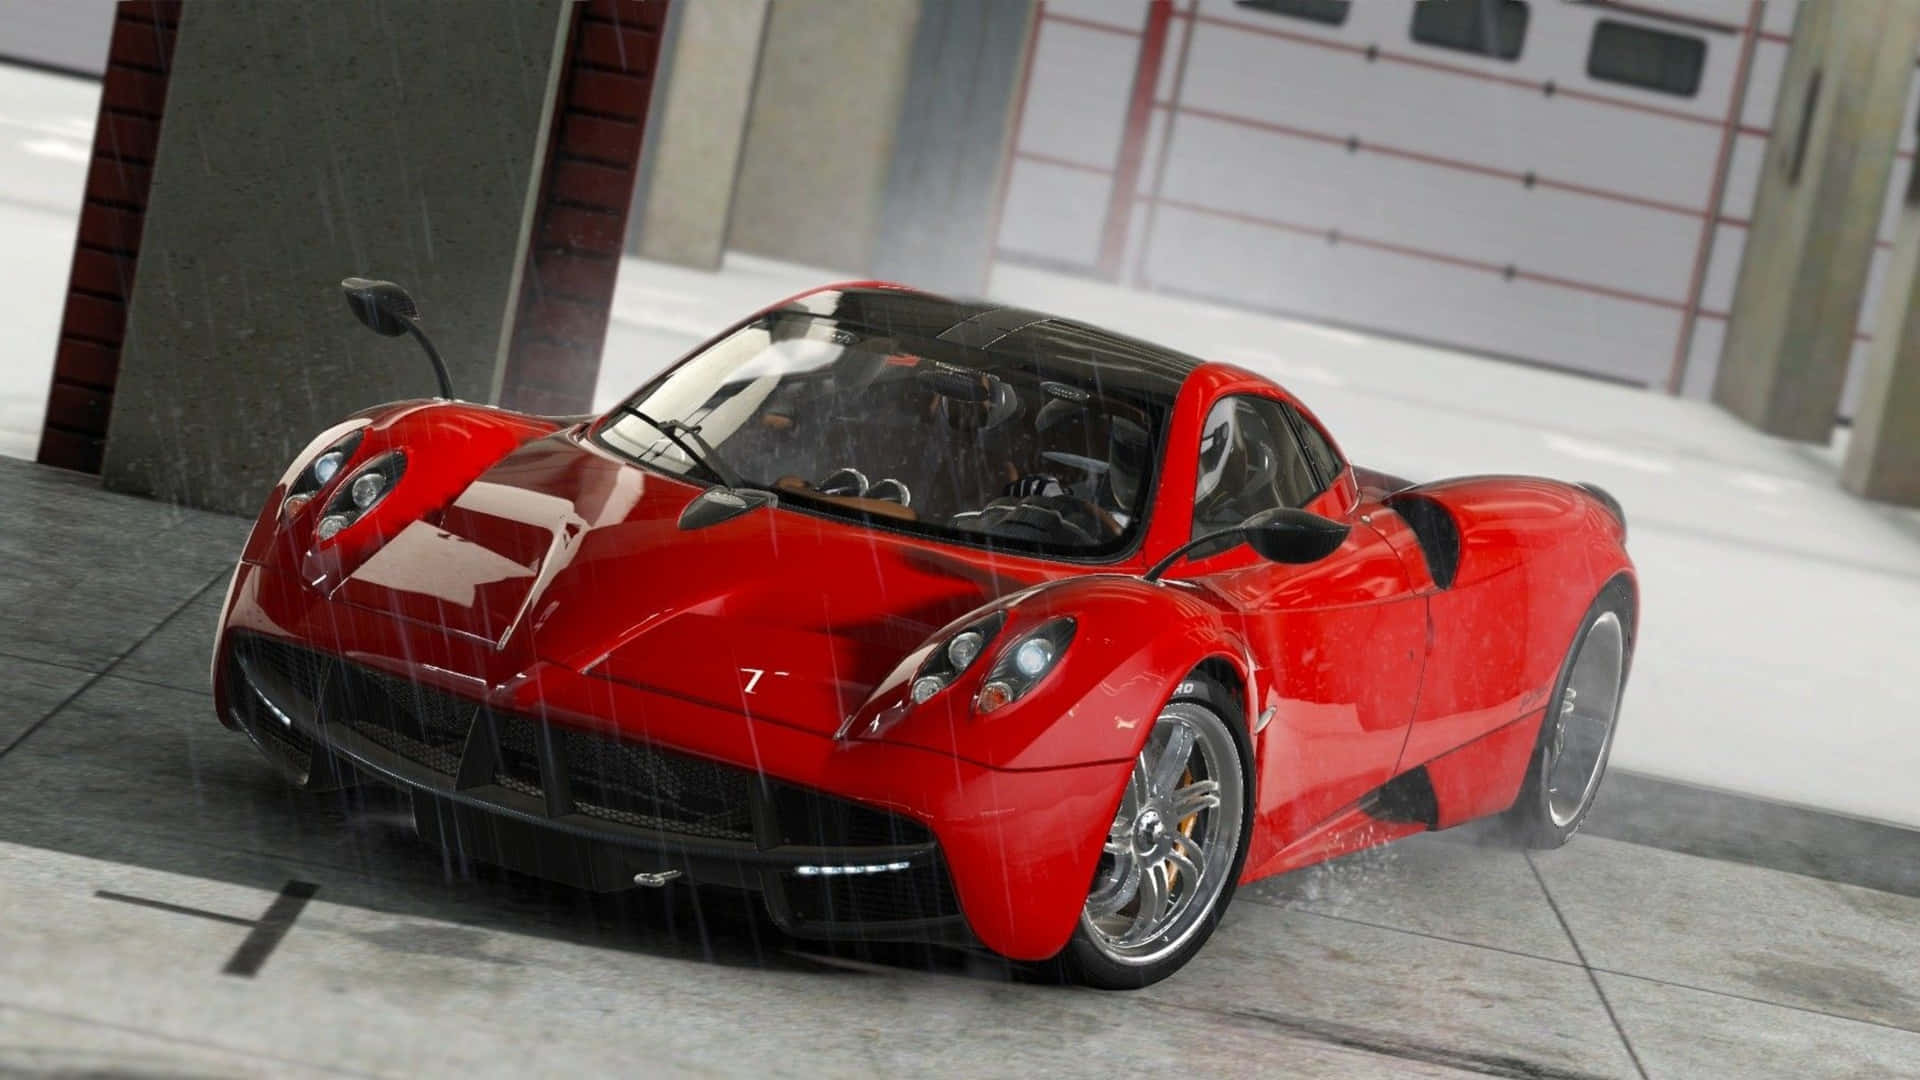 4k Project Cars Red Pagani Huayra Background